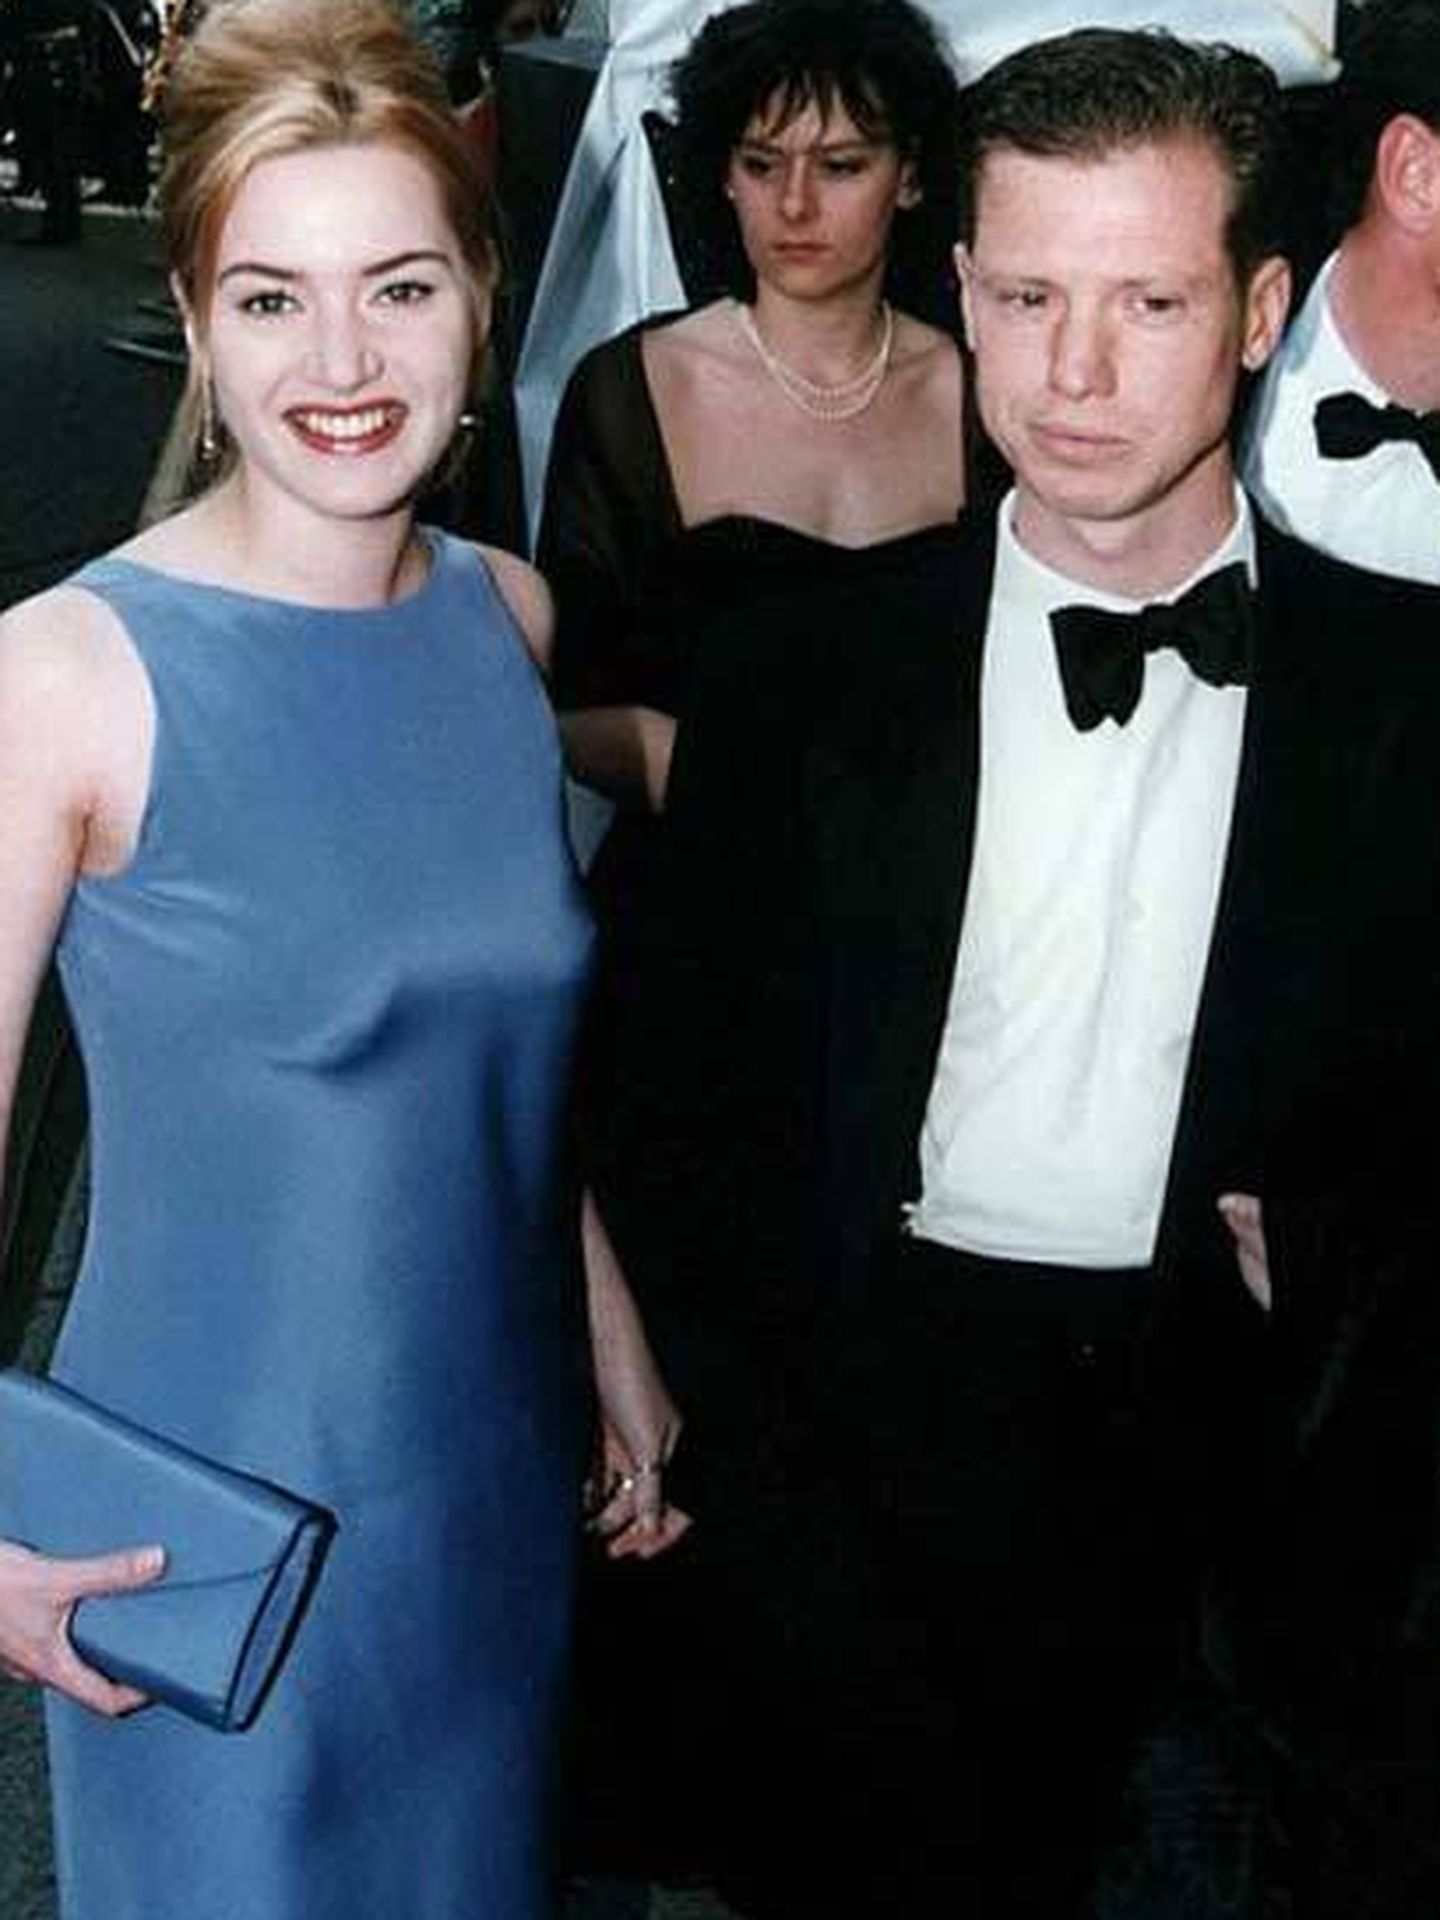 Stephen Tredre with Kate winslet